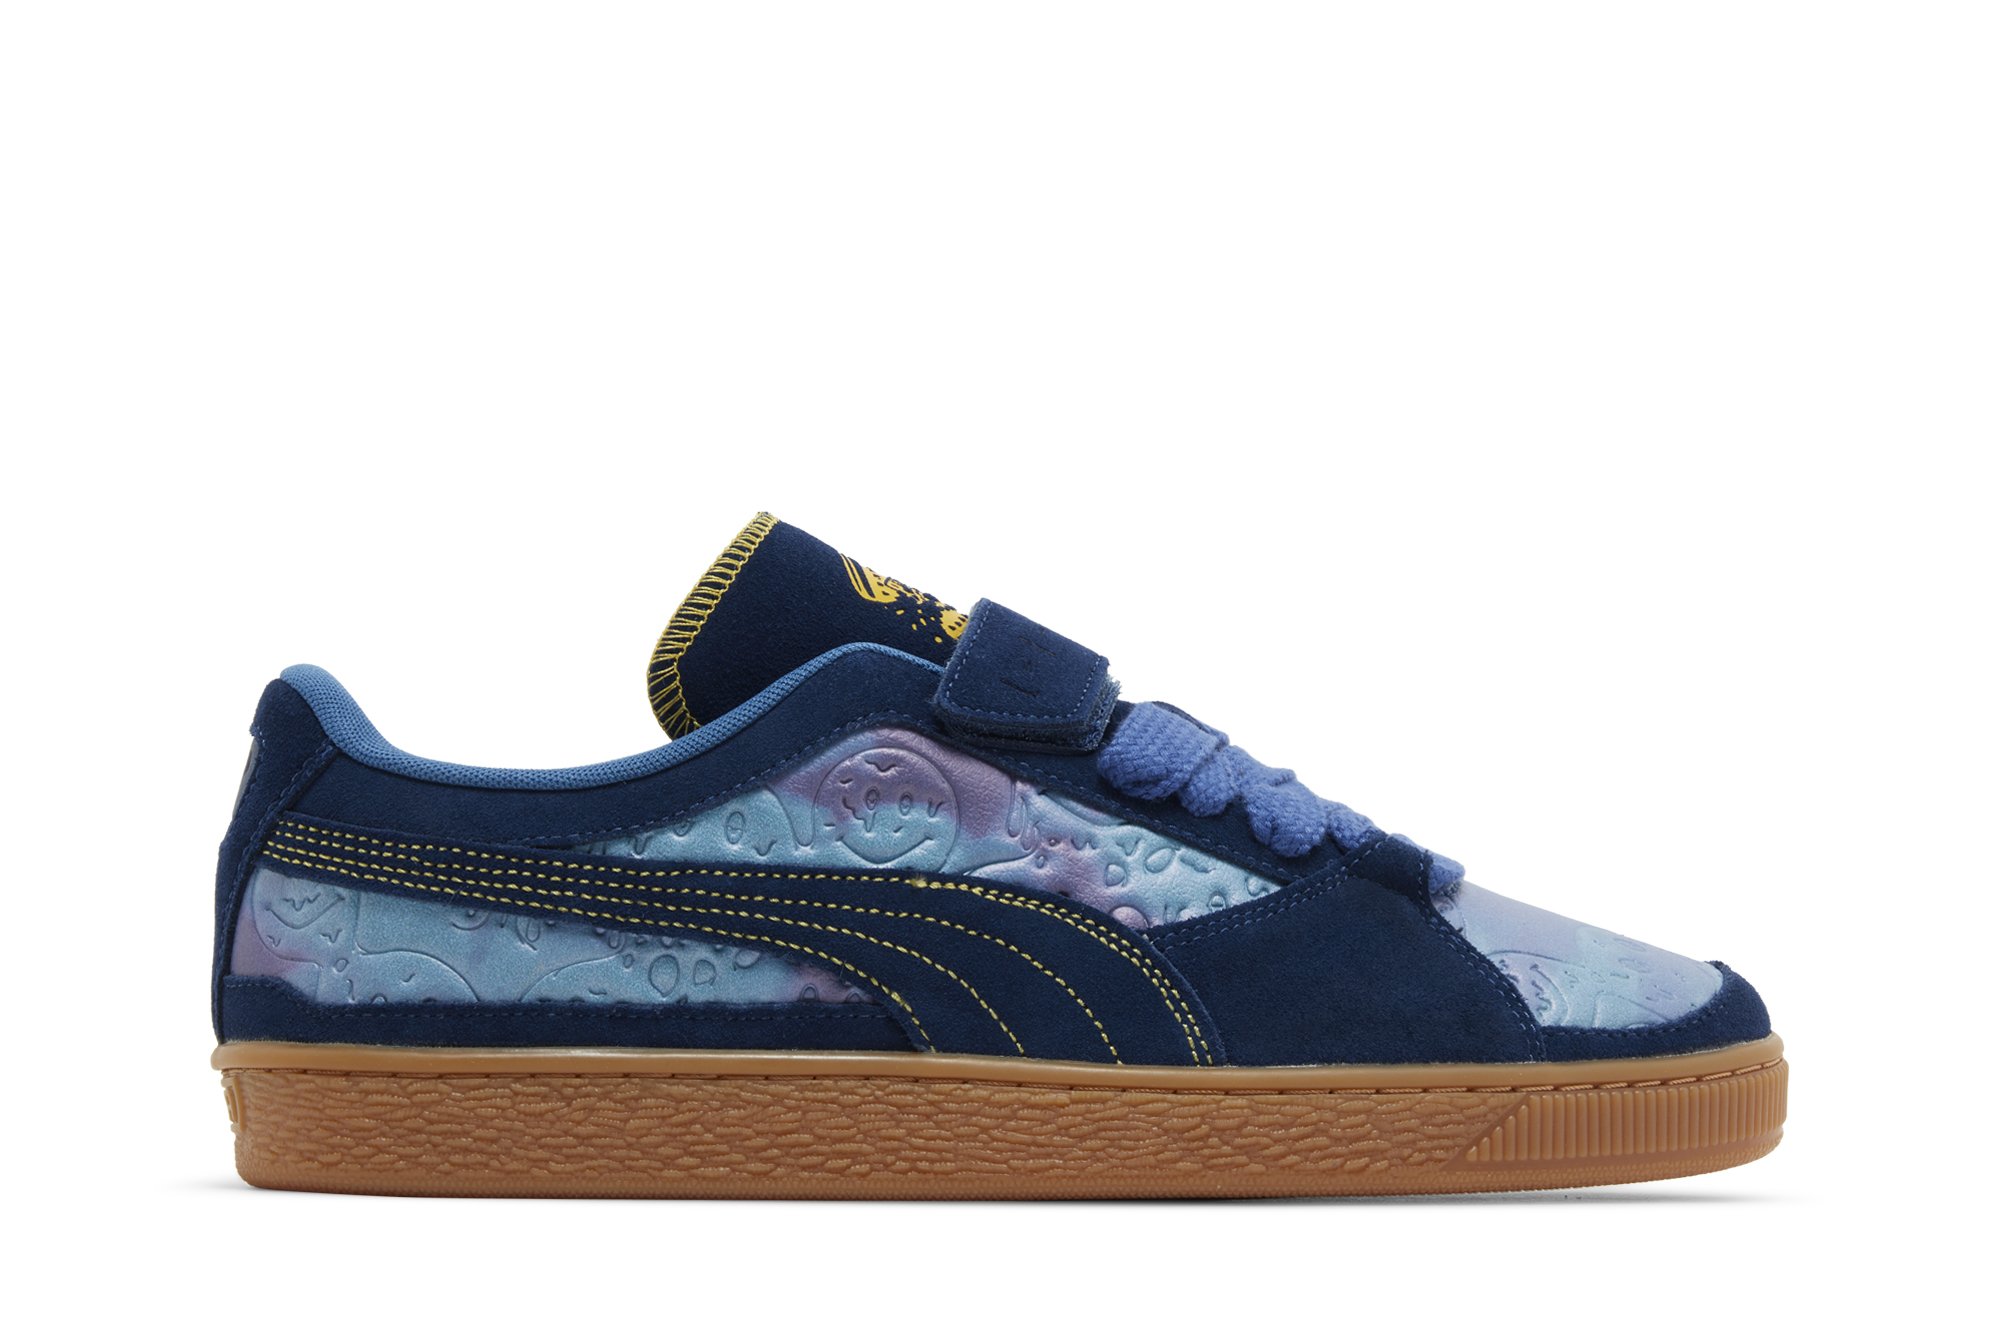 Dazed and Confused x Suede 'Persian Blue'